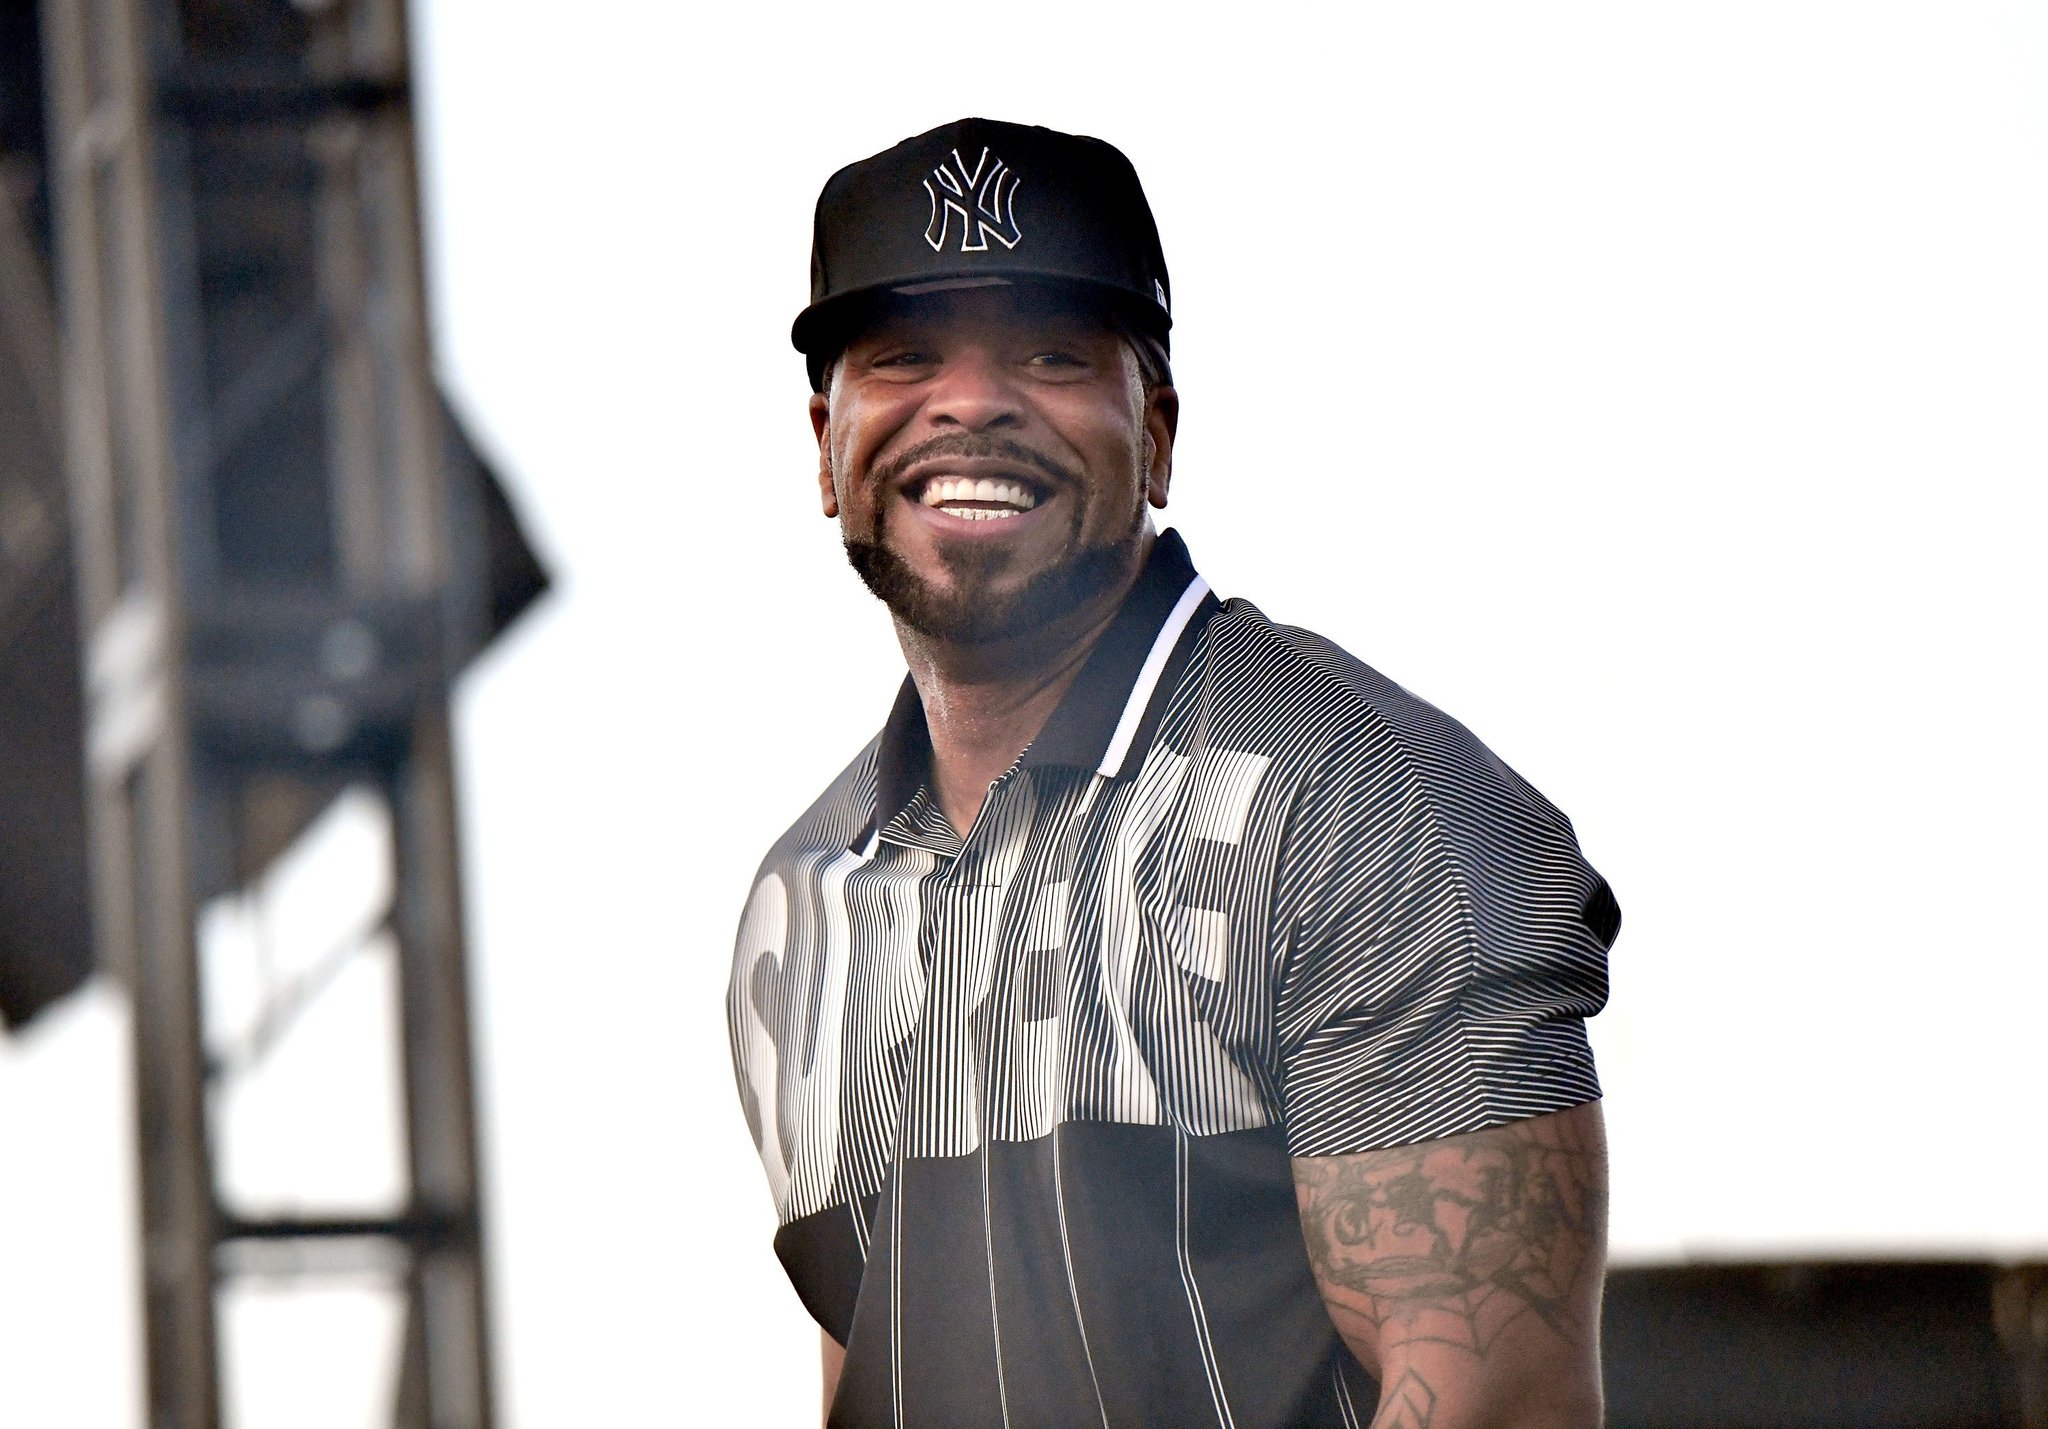 HAPPY BIRTHDAY TO THE AMAZING METHOD MAN!!!  An all-time favorite of mine!! 